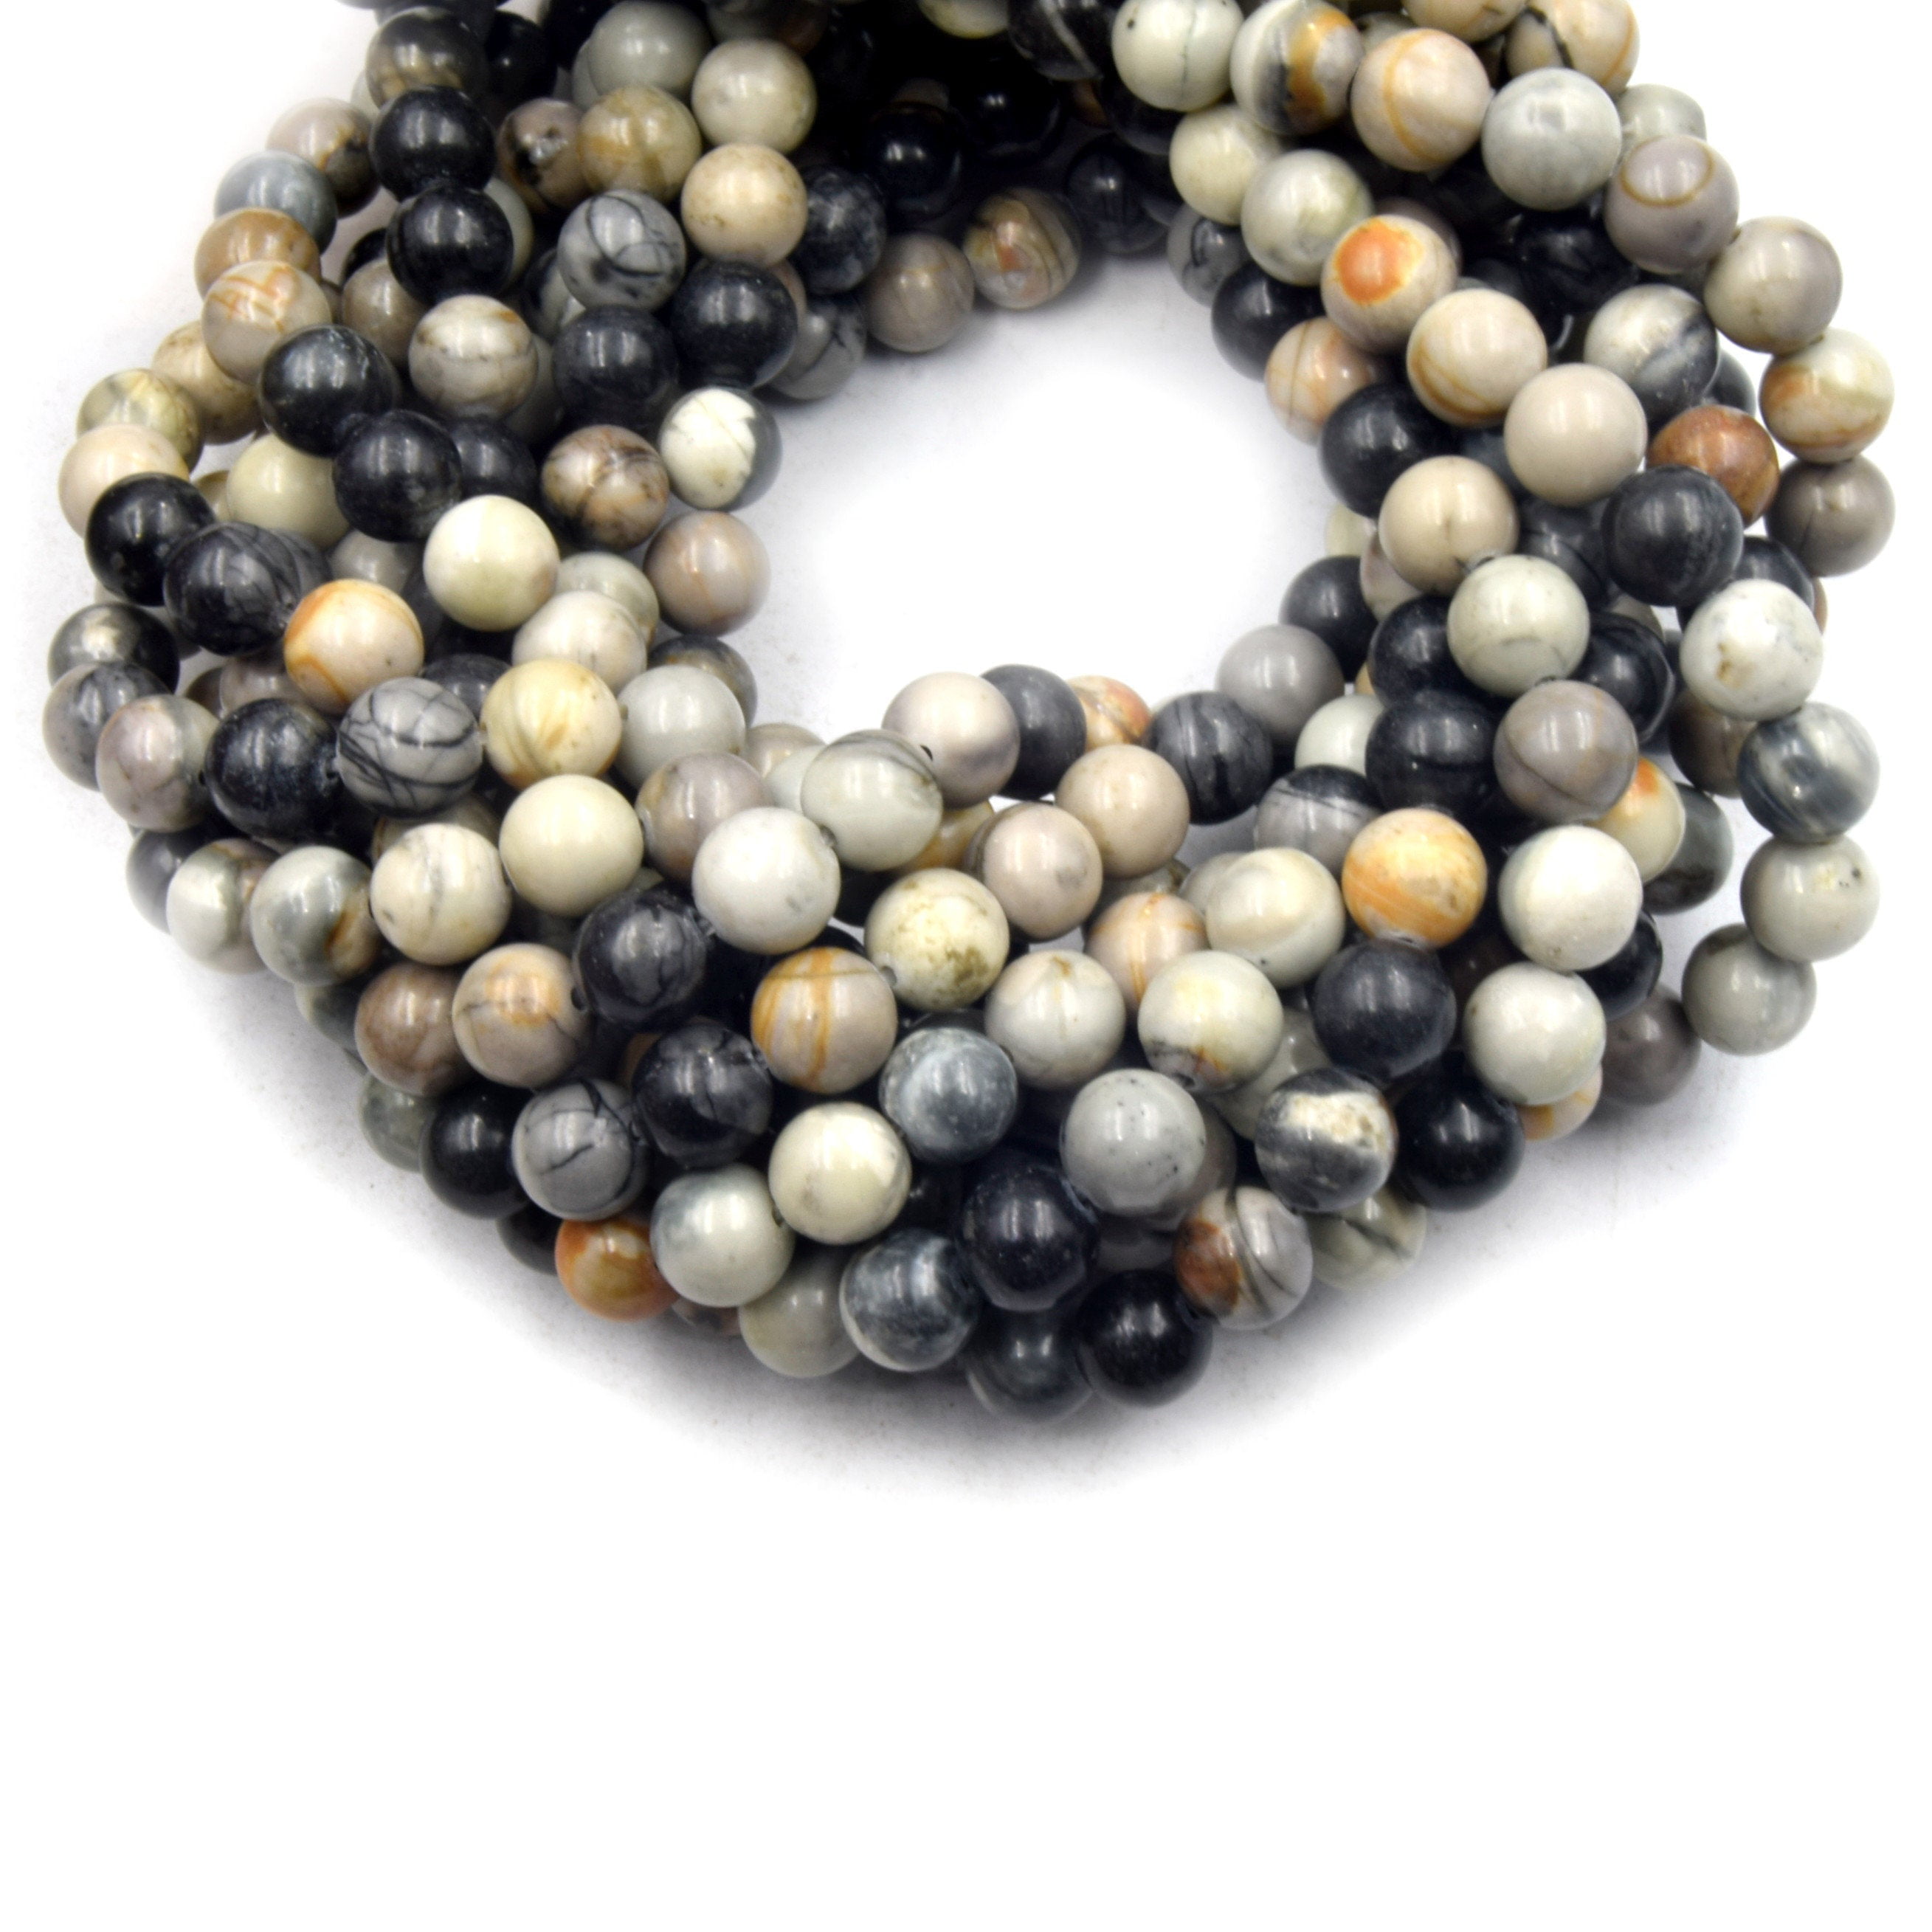 6-14mm natural multicolor Picasso jasper round beads necklace Length optional 